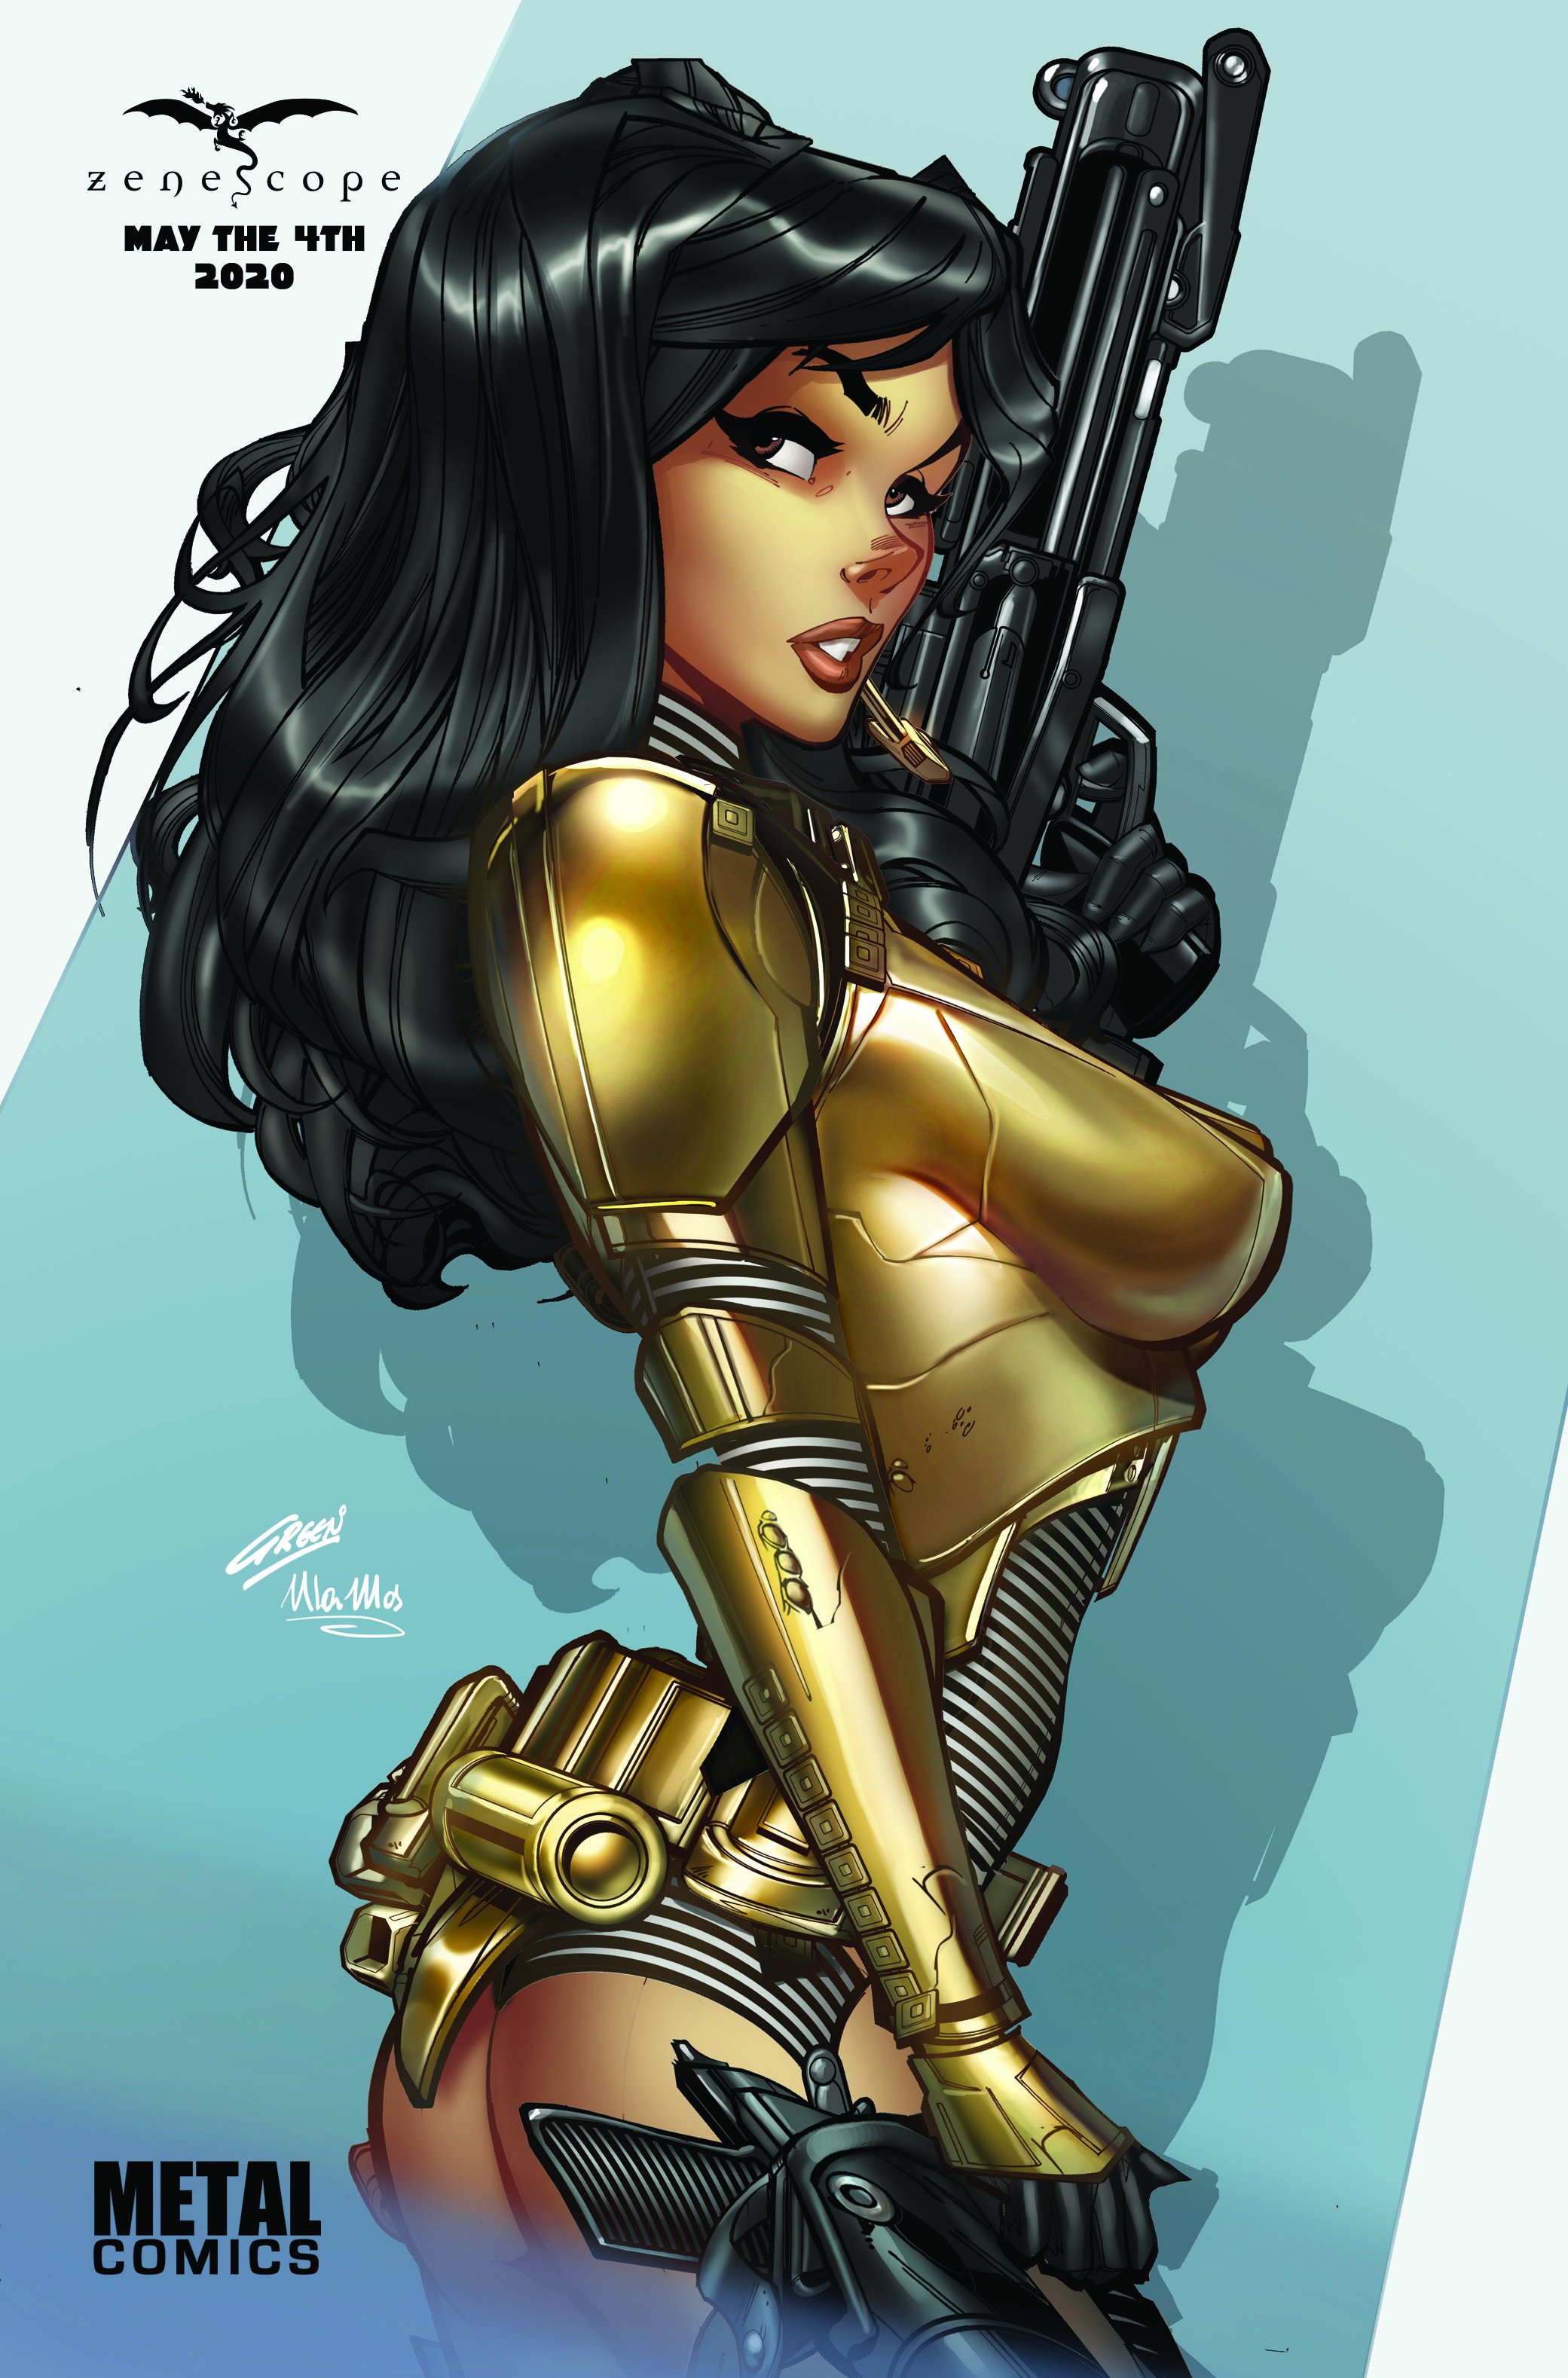 Image of May the 4th 2020 - Gold Trooper Metal Cover #1